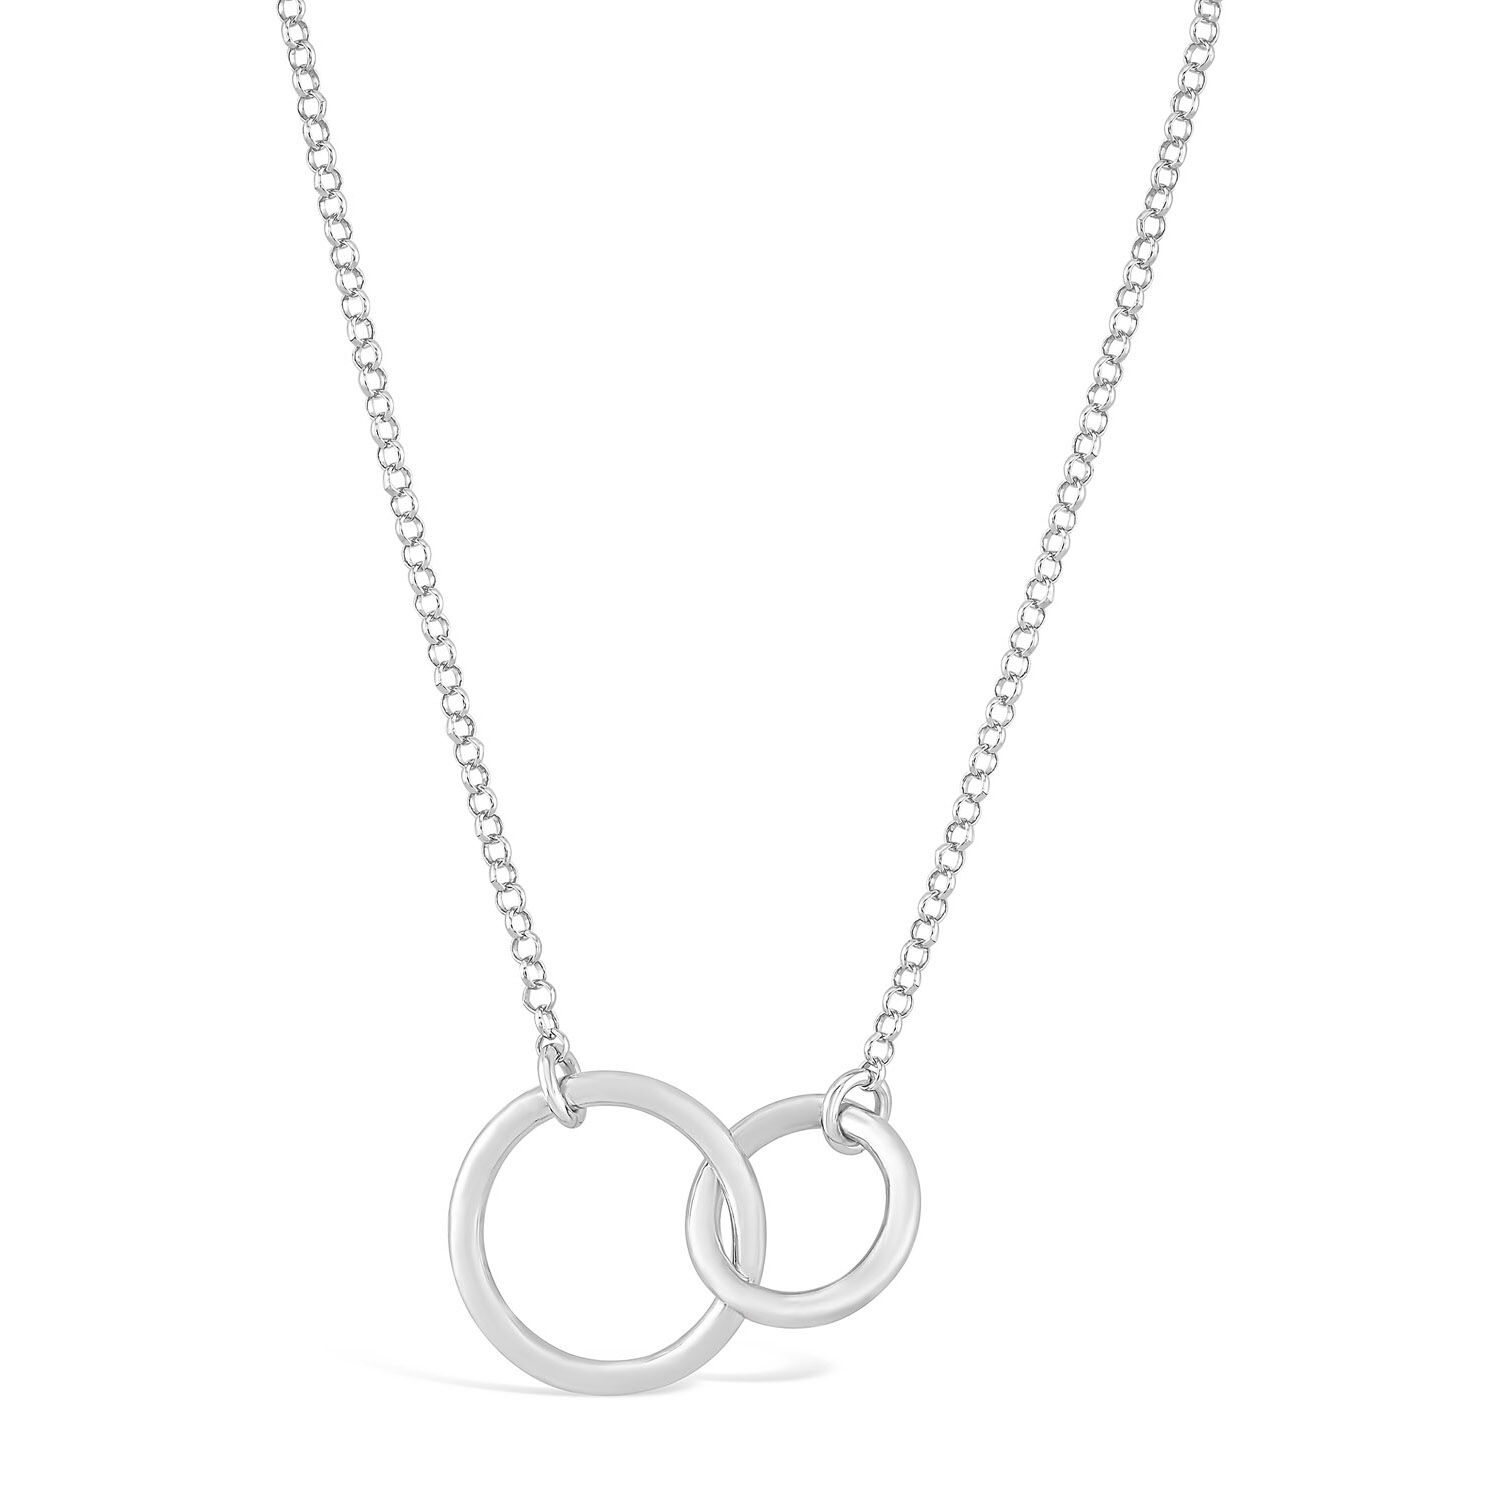 Amazon.com: 925 Sterling Silver Necklace with Interlocking Two-Circles  Pendant Necklace, 16